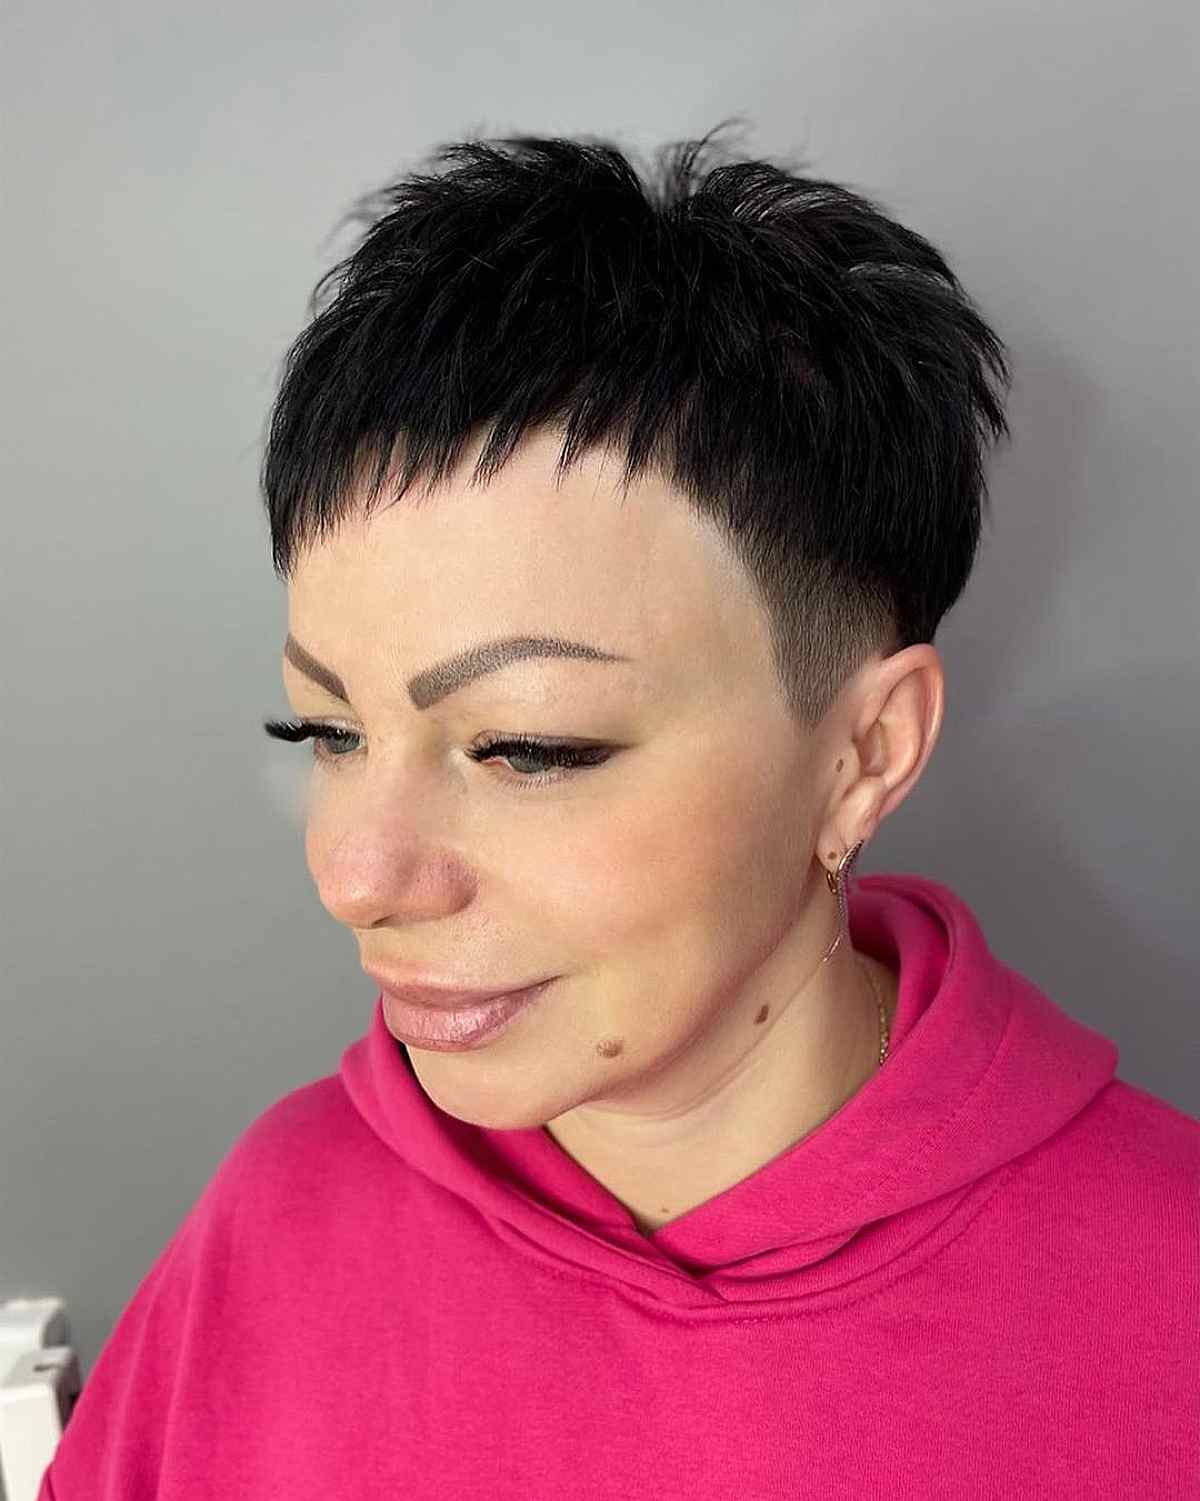 Very Short Disconnected Pixie Crop with Piece-y Layers